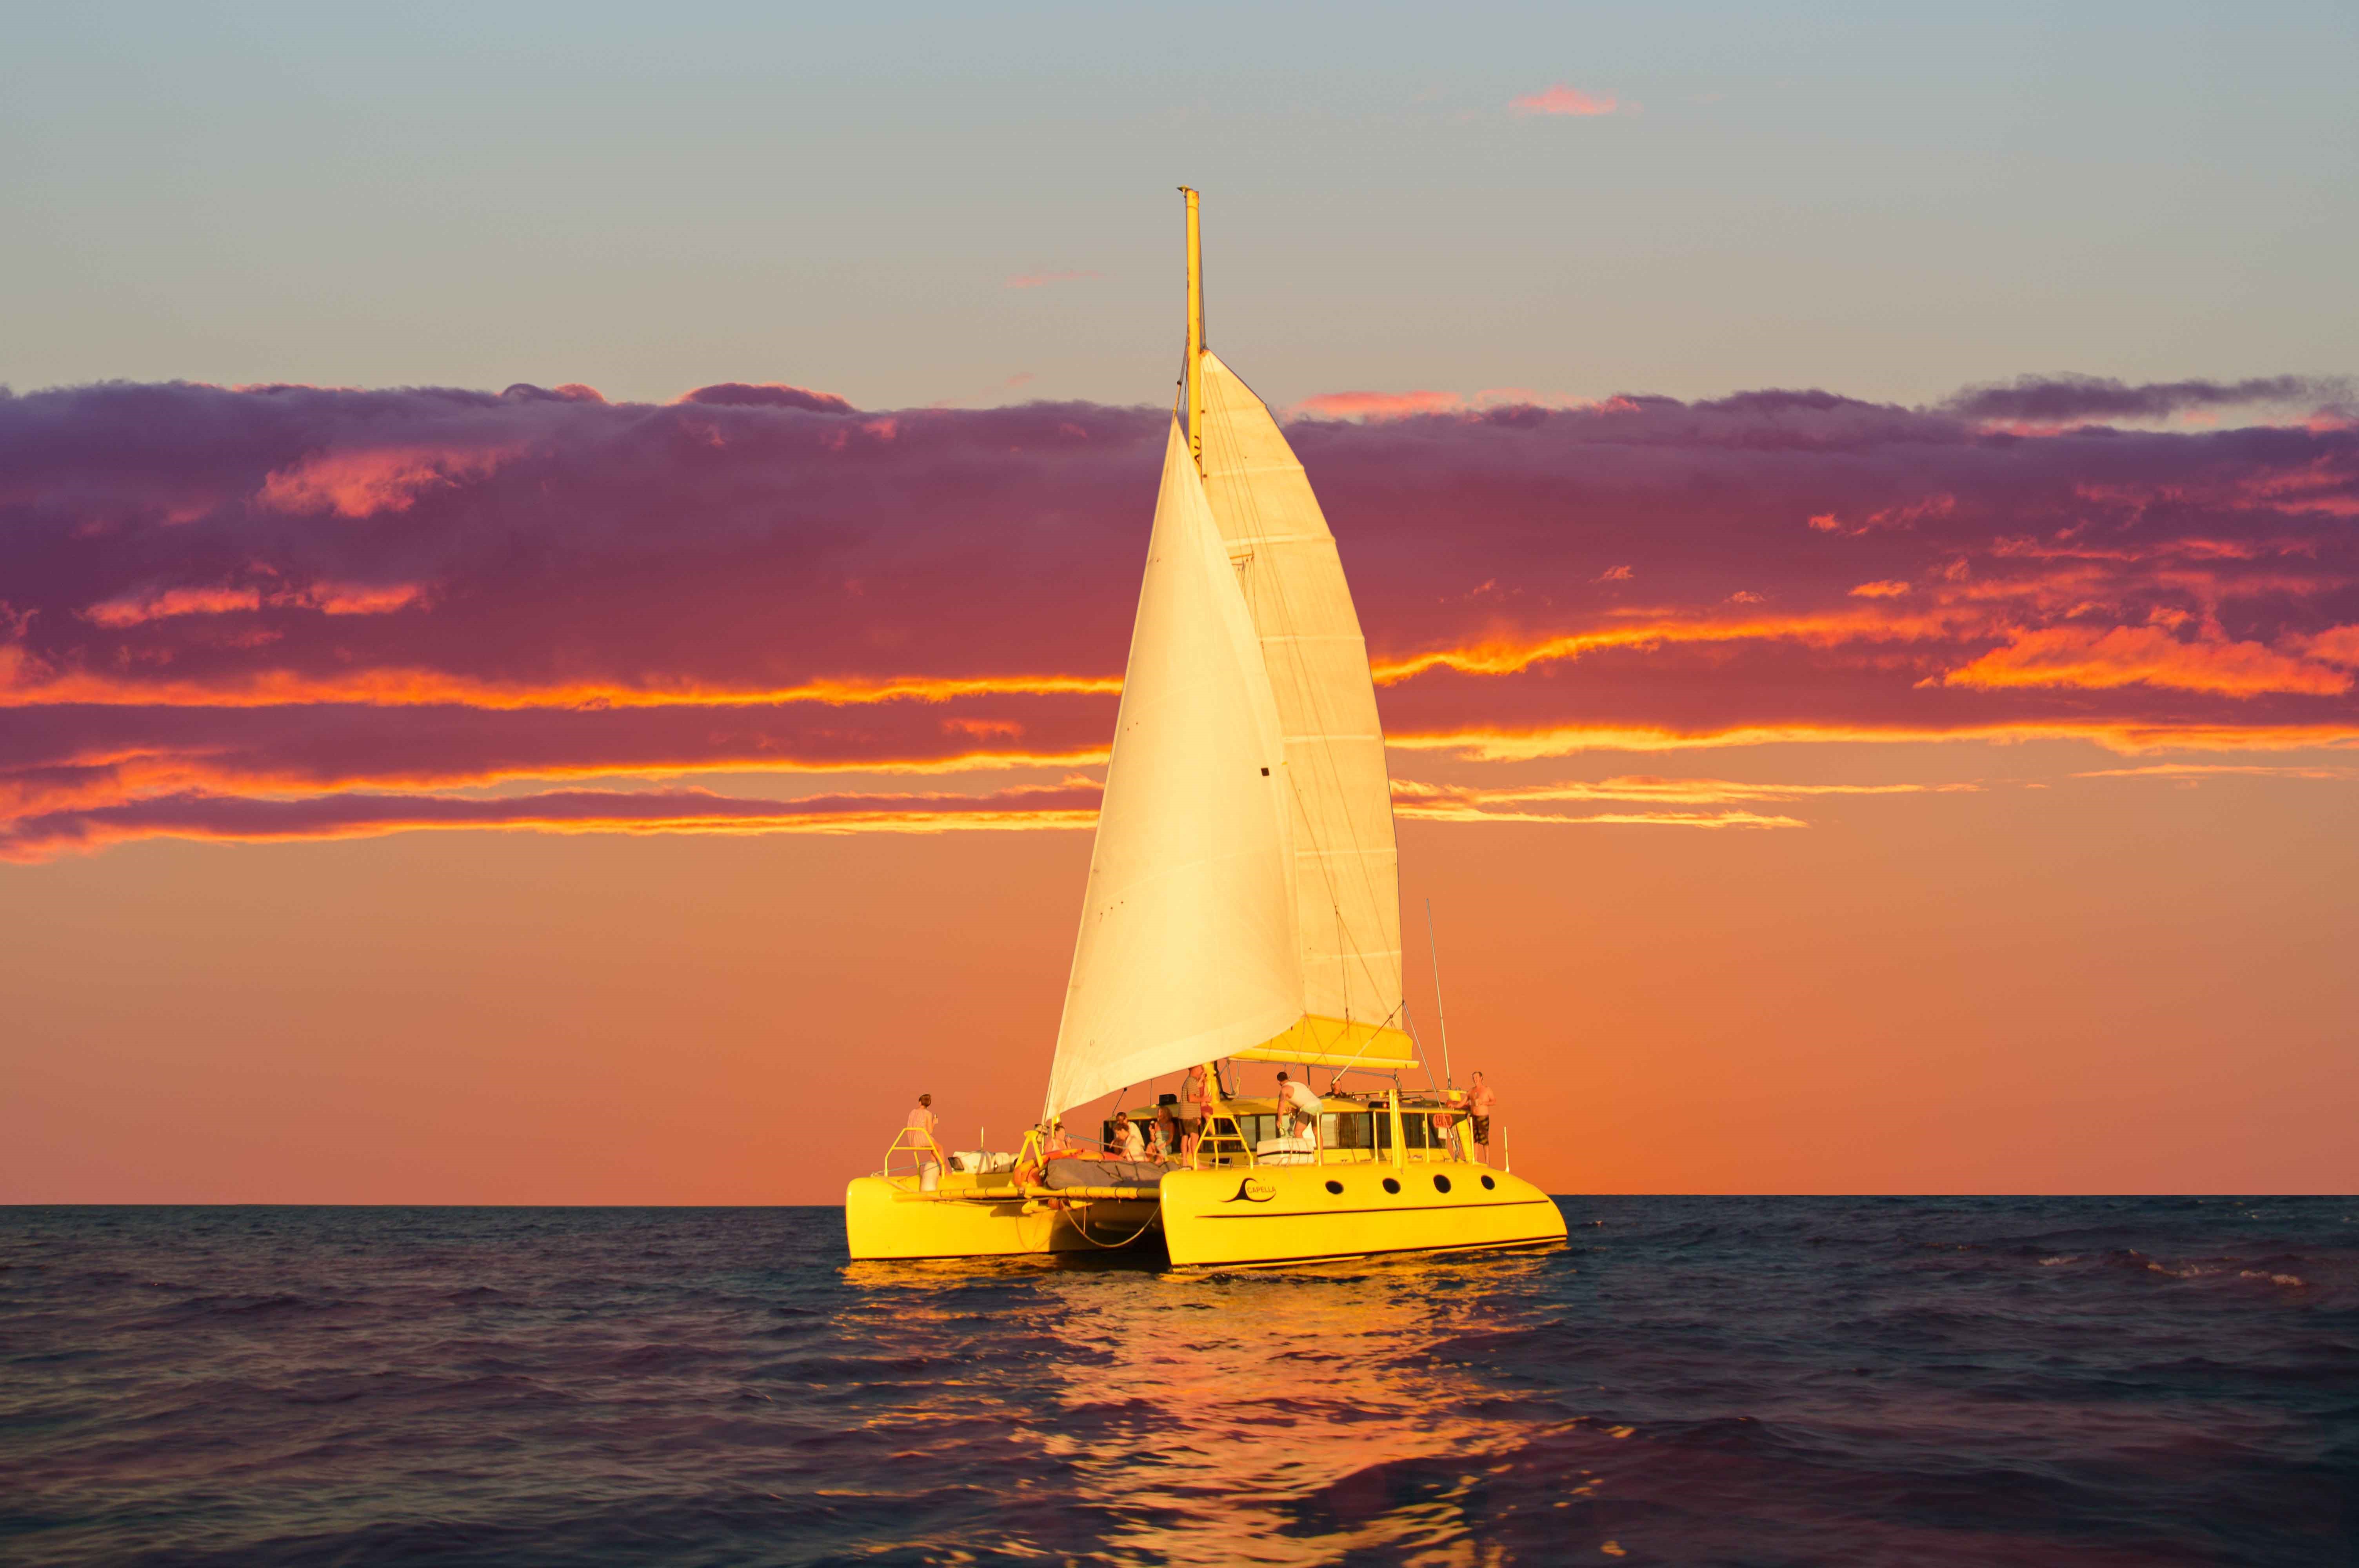 watch the sunset in fremantle on a twilight sail